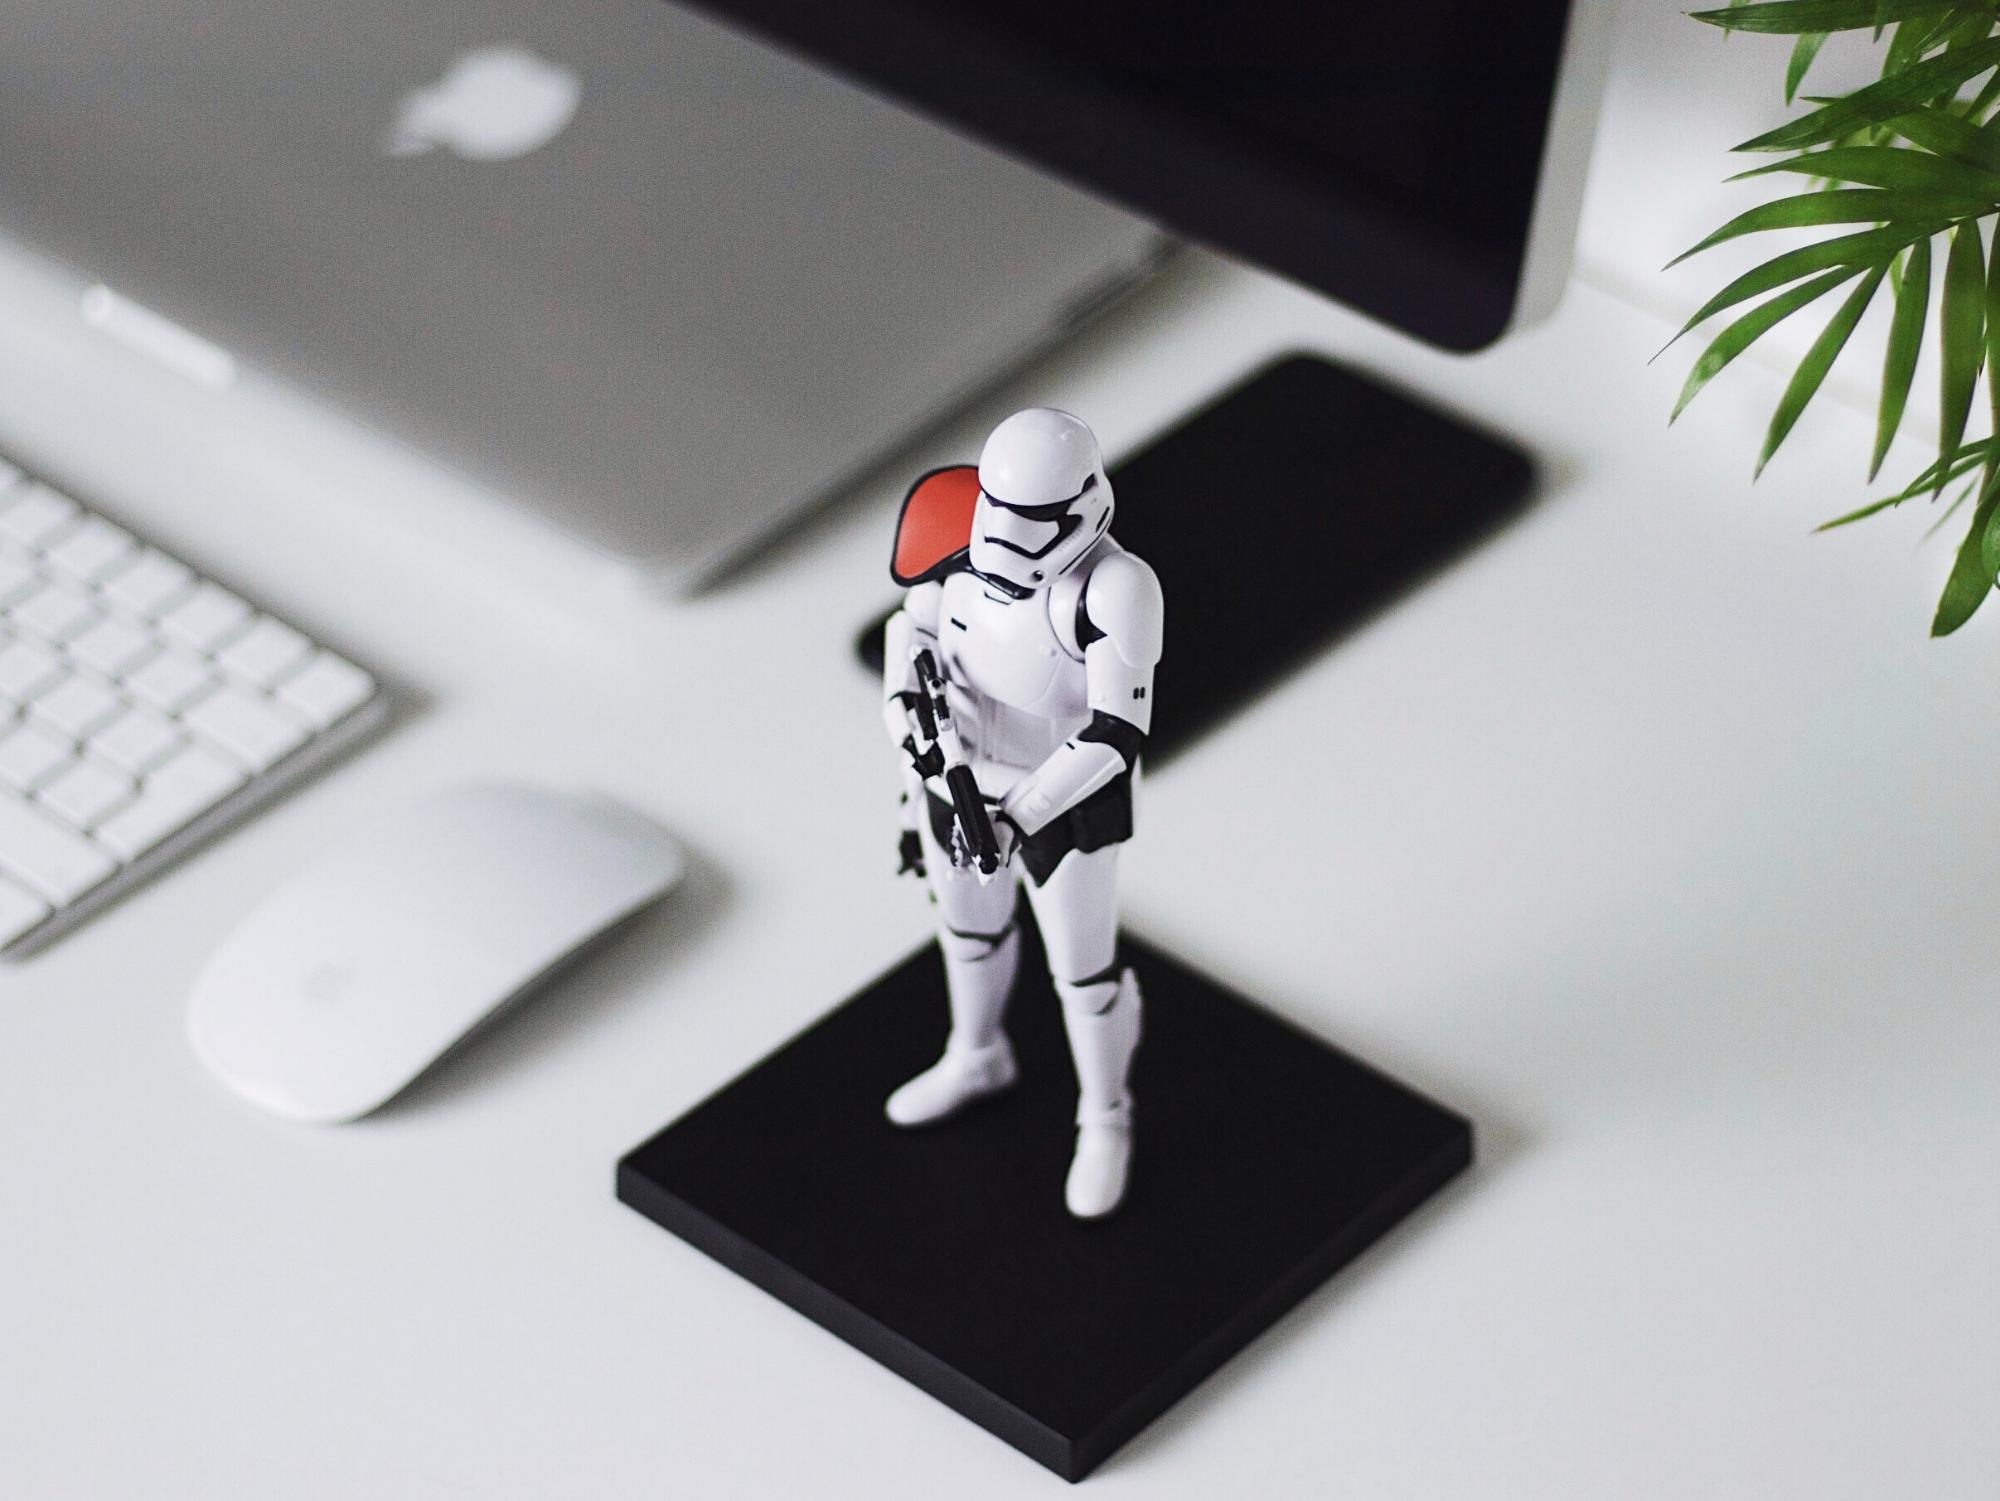 We love toys and all things geeky! The idea that this stormtrooper would guard our desk when away was something we wanted to try and capture. Also the white armour fits perfectly with the minimal aesthetic of our tech. by Liam Tucker